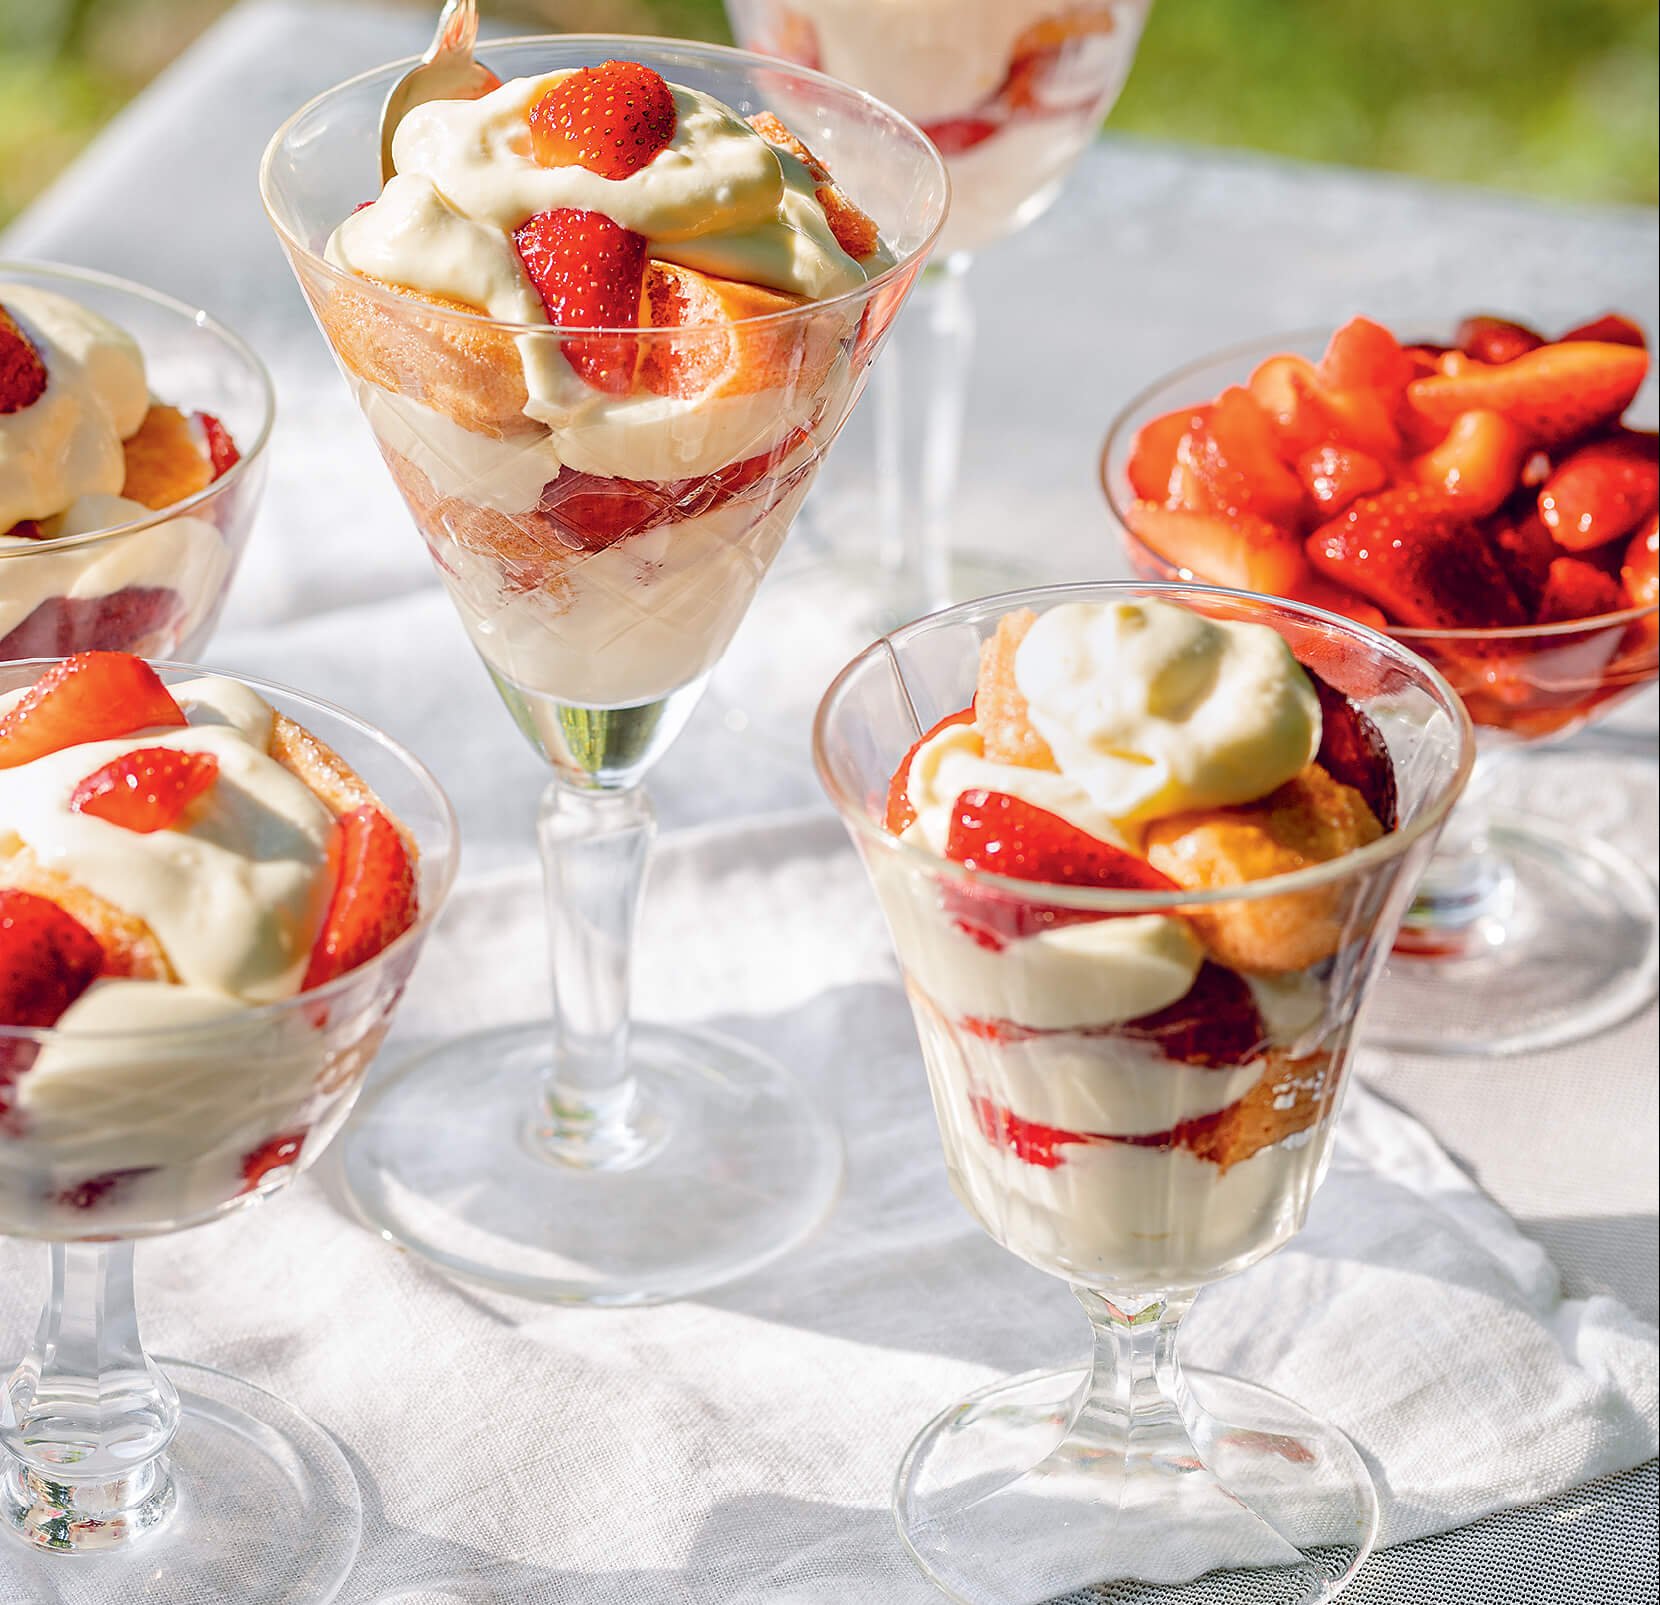 A white cloth on grass laid with strawberry parfaits